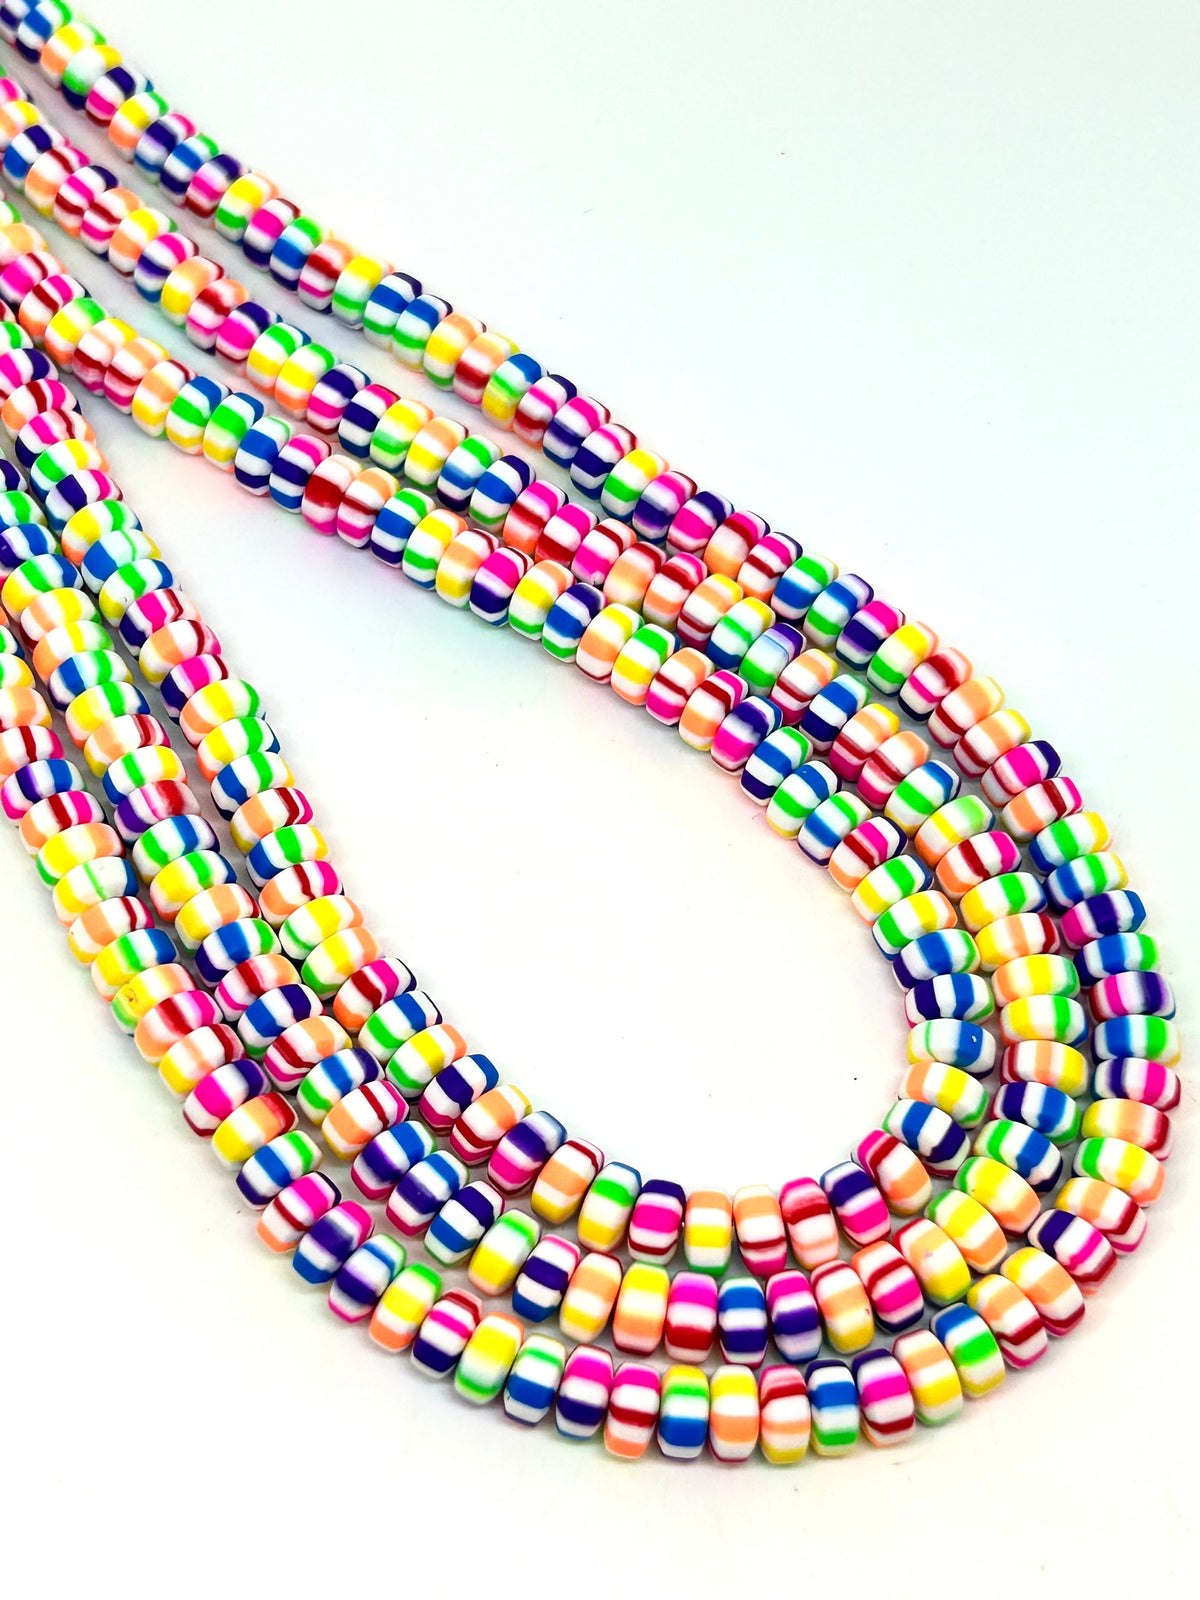 Candy Bead Necklace, Heishi Beads, Disc Beads, 6mm Polymer Clay Beads for Jewelry  Making, Heishi Necklace, Bright Colorful Beads 